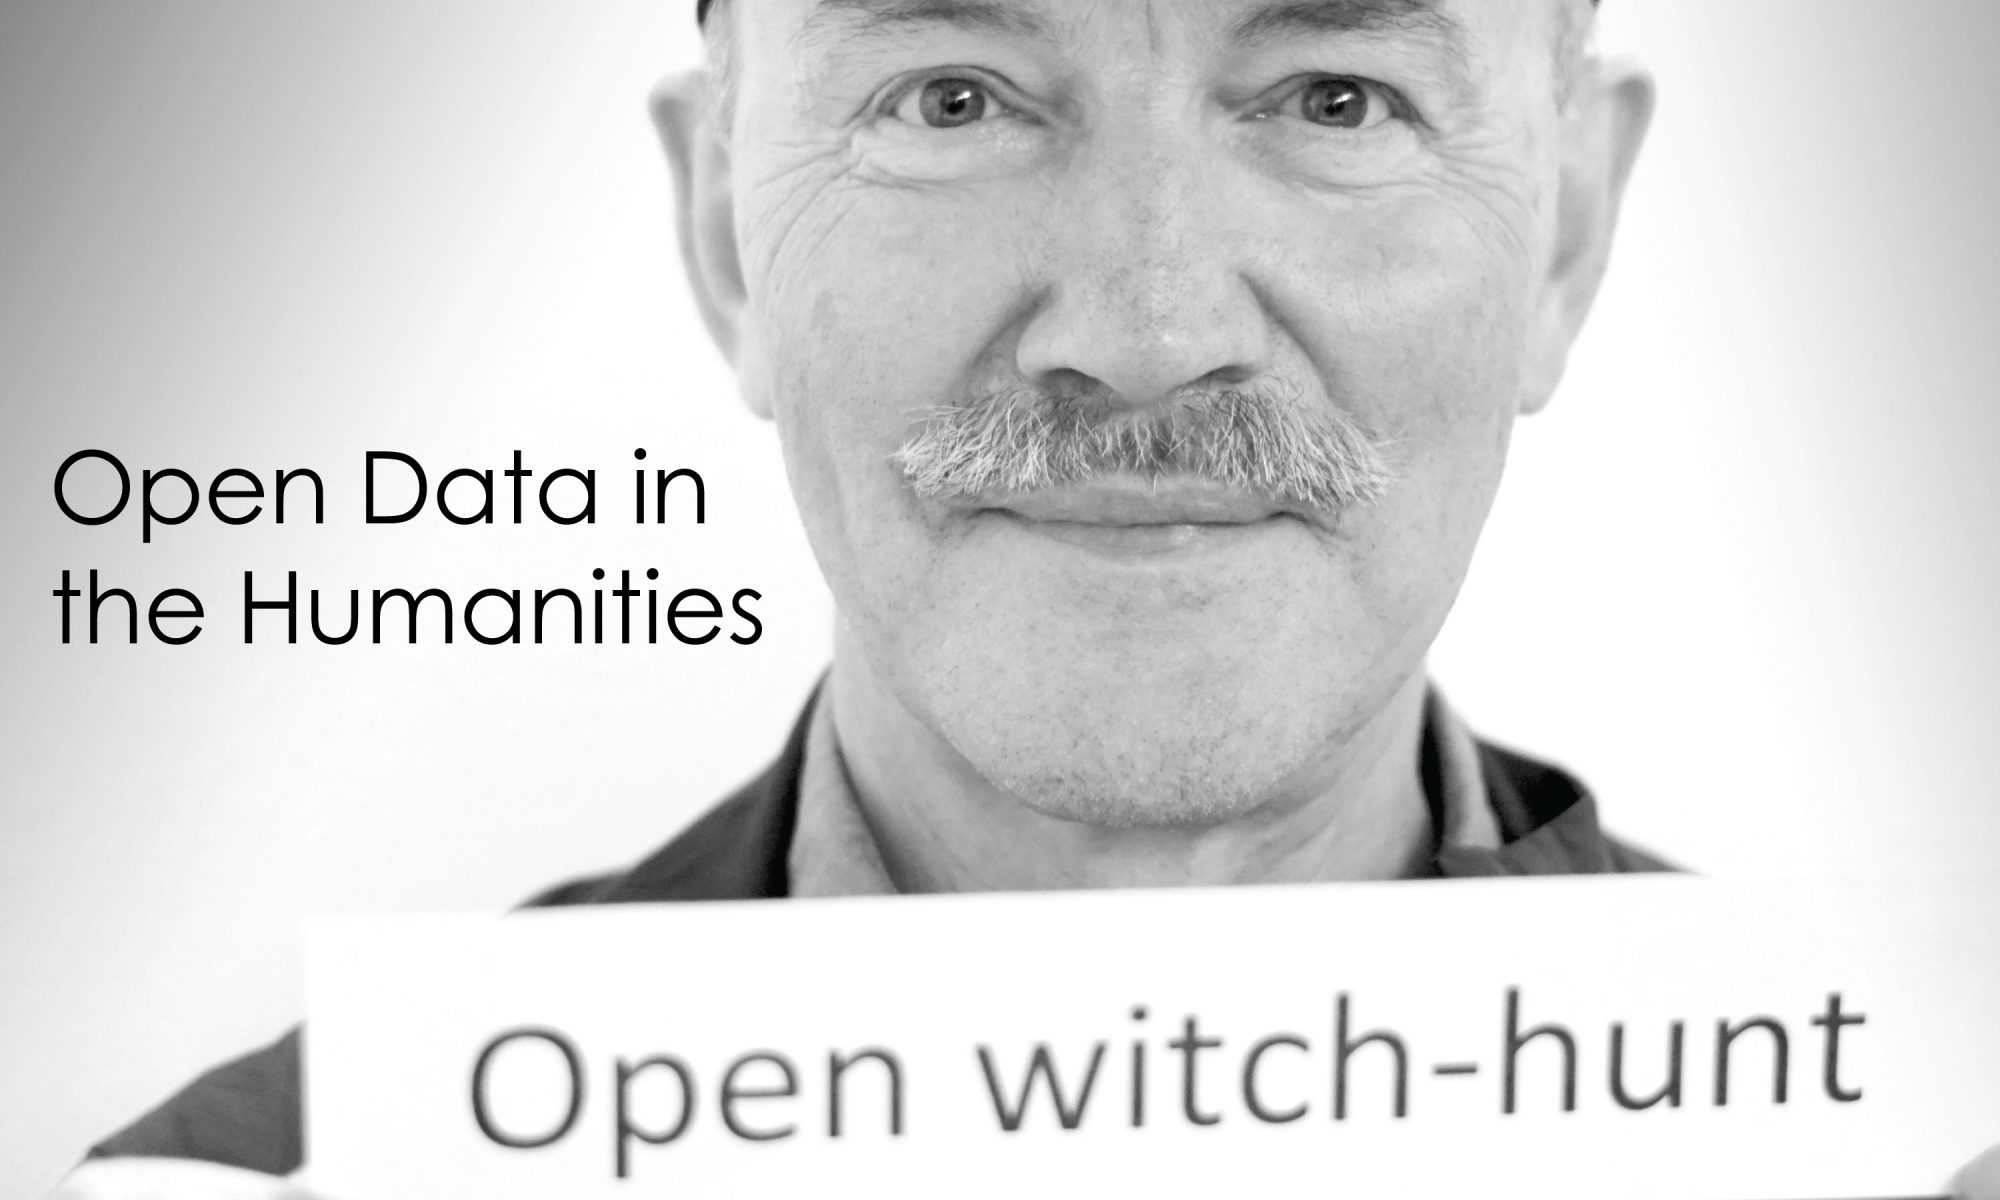 Historian Rune Blix Hagen from UiT talks about Open Data and Witchcraft.